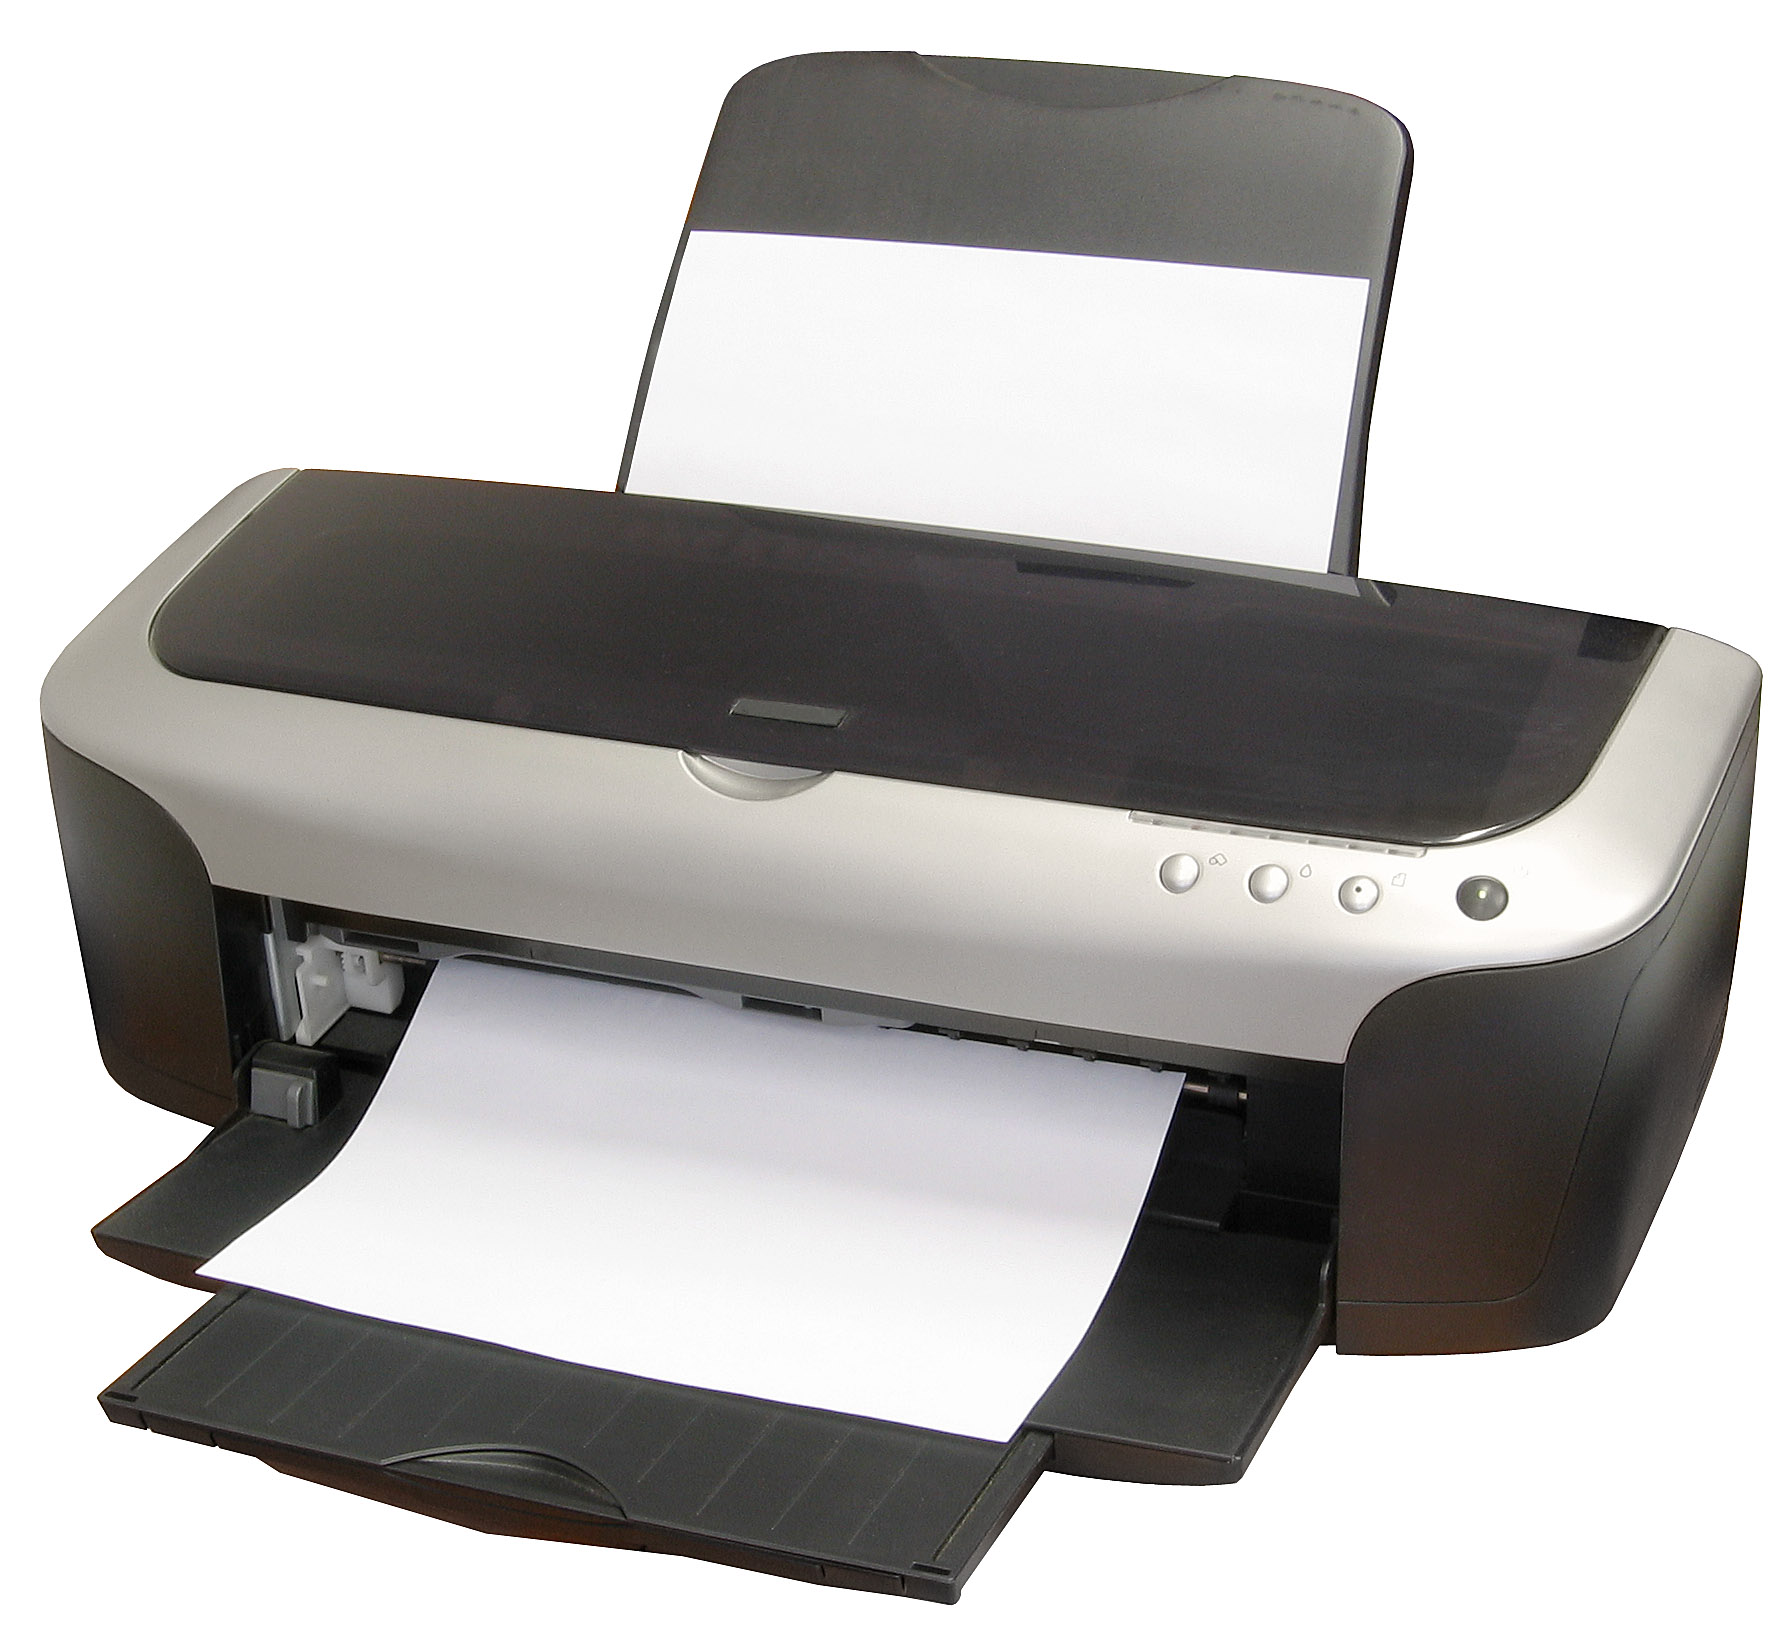 The Best Cheap Printers For 2023